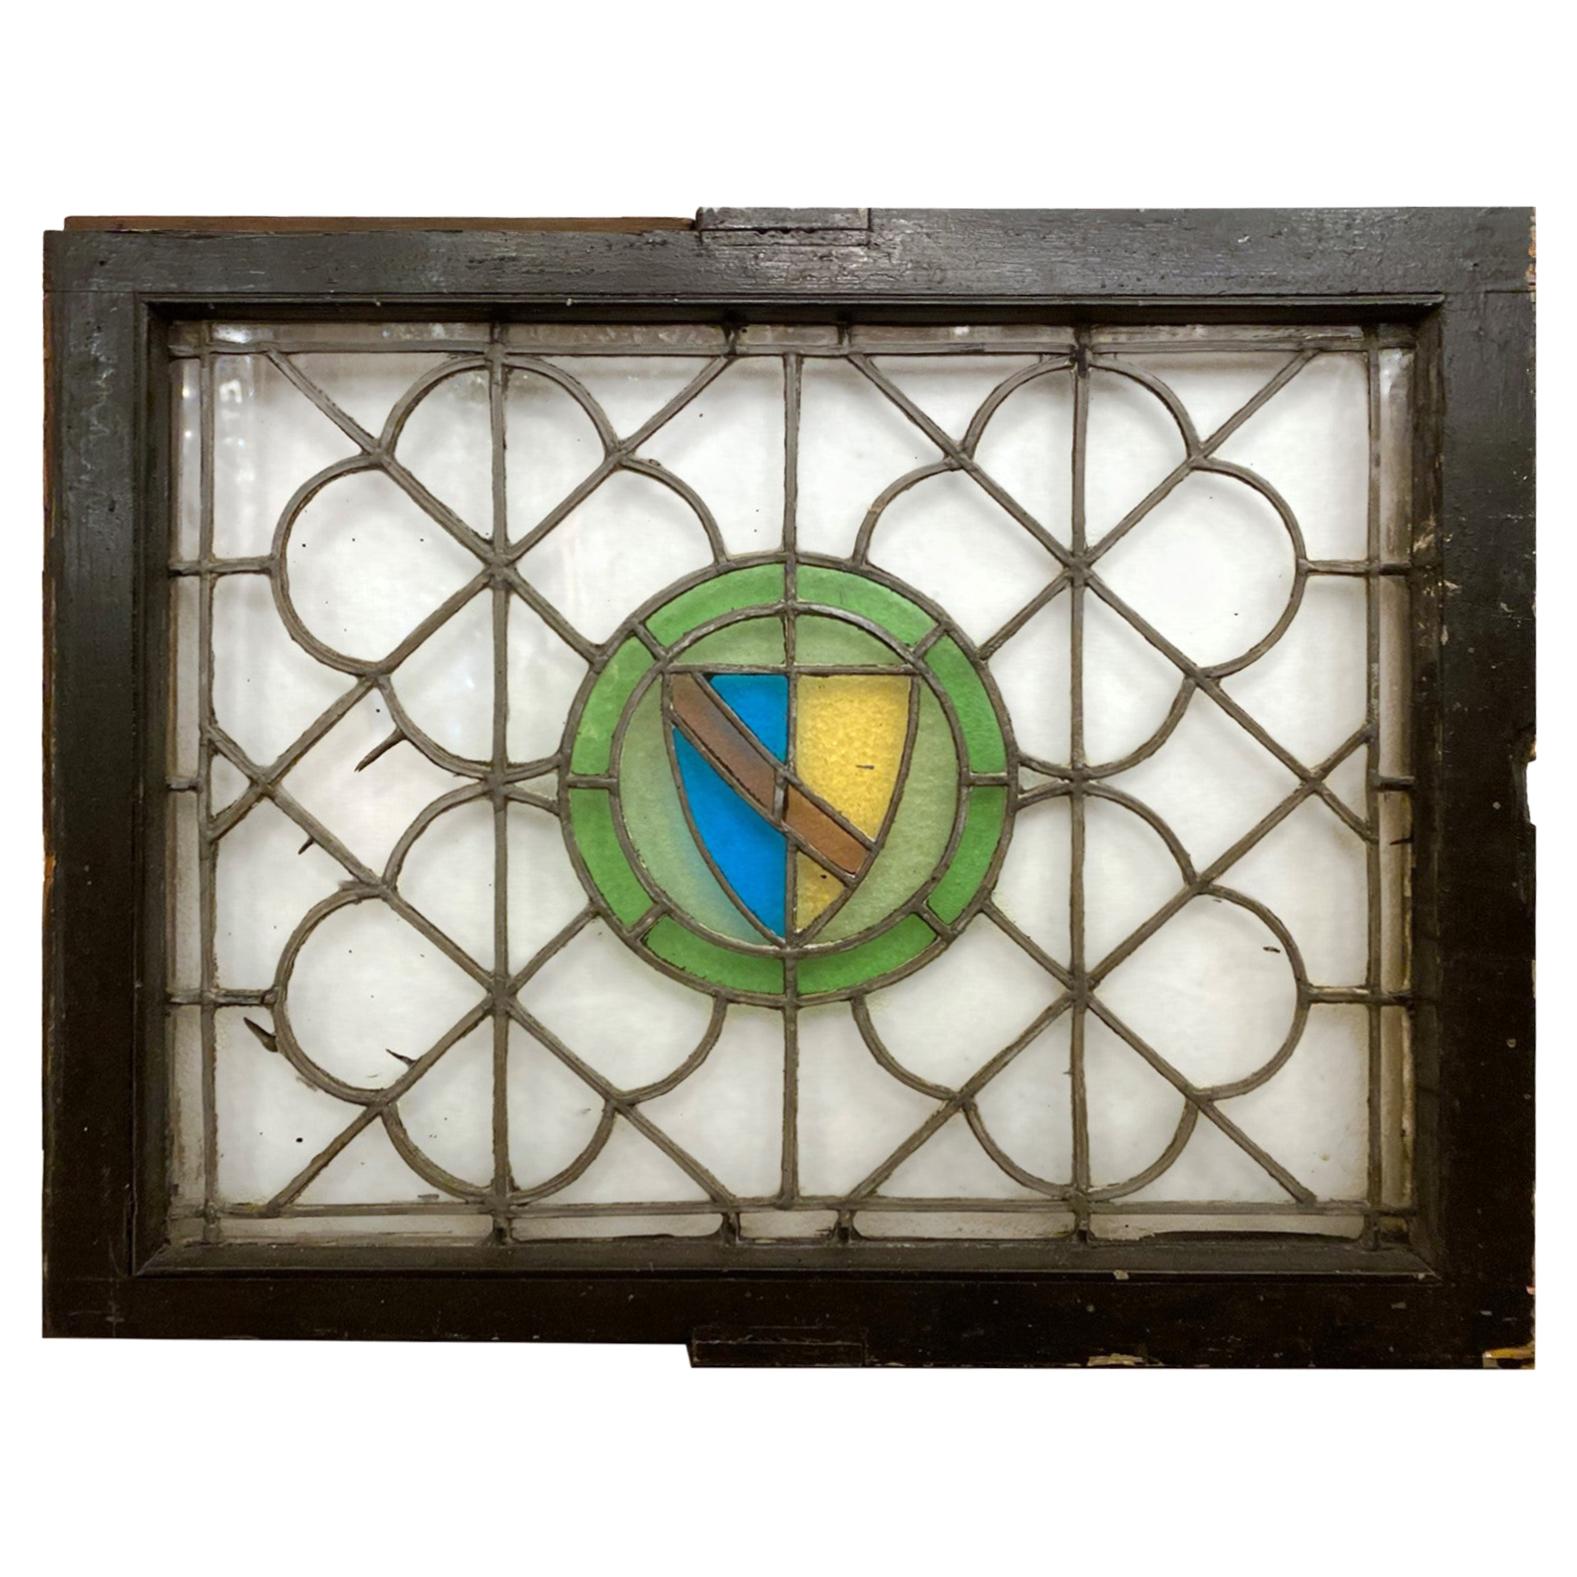 Early 20th C. Leaded Stained Glass Window with a Quatrefoil and Shield Motif